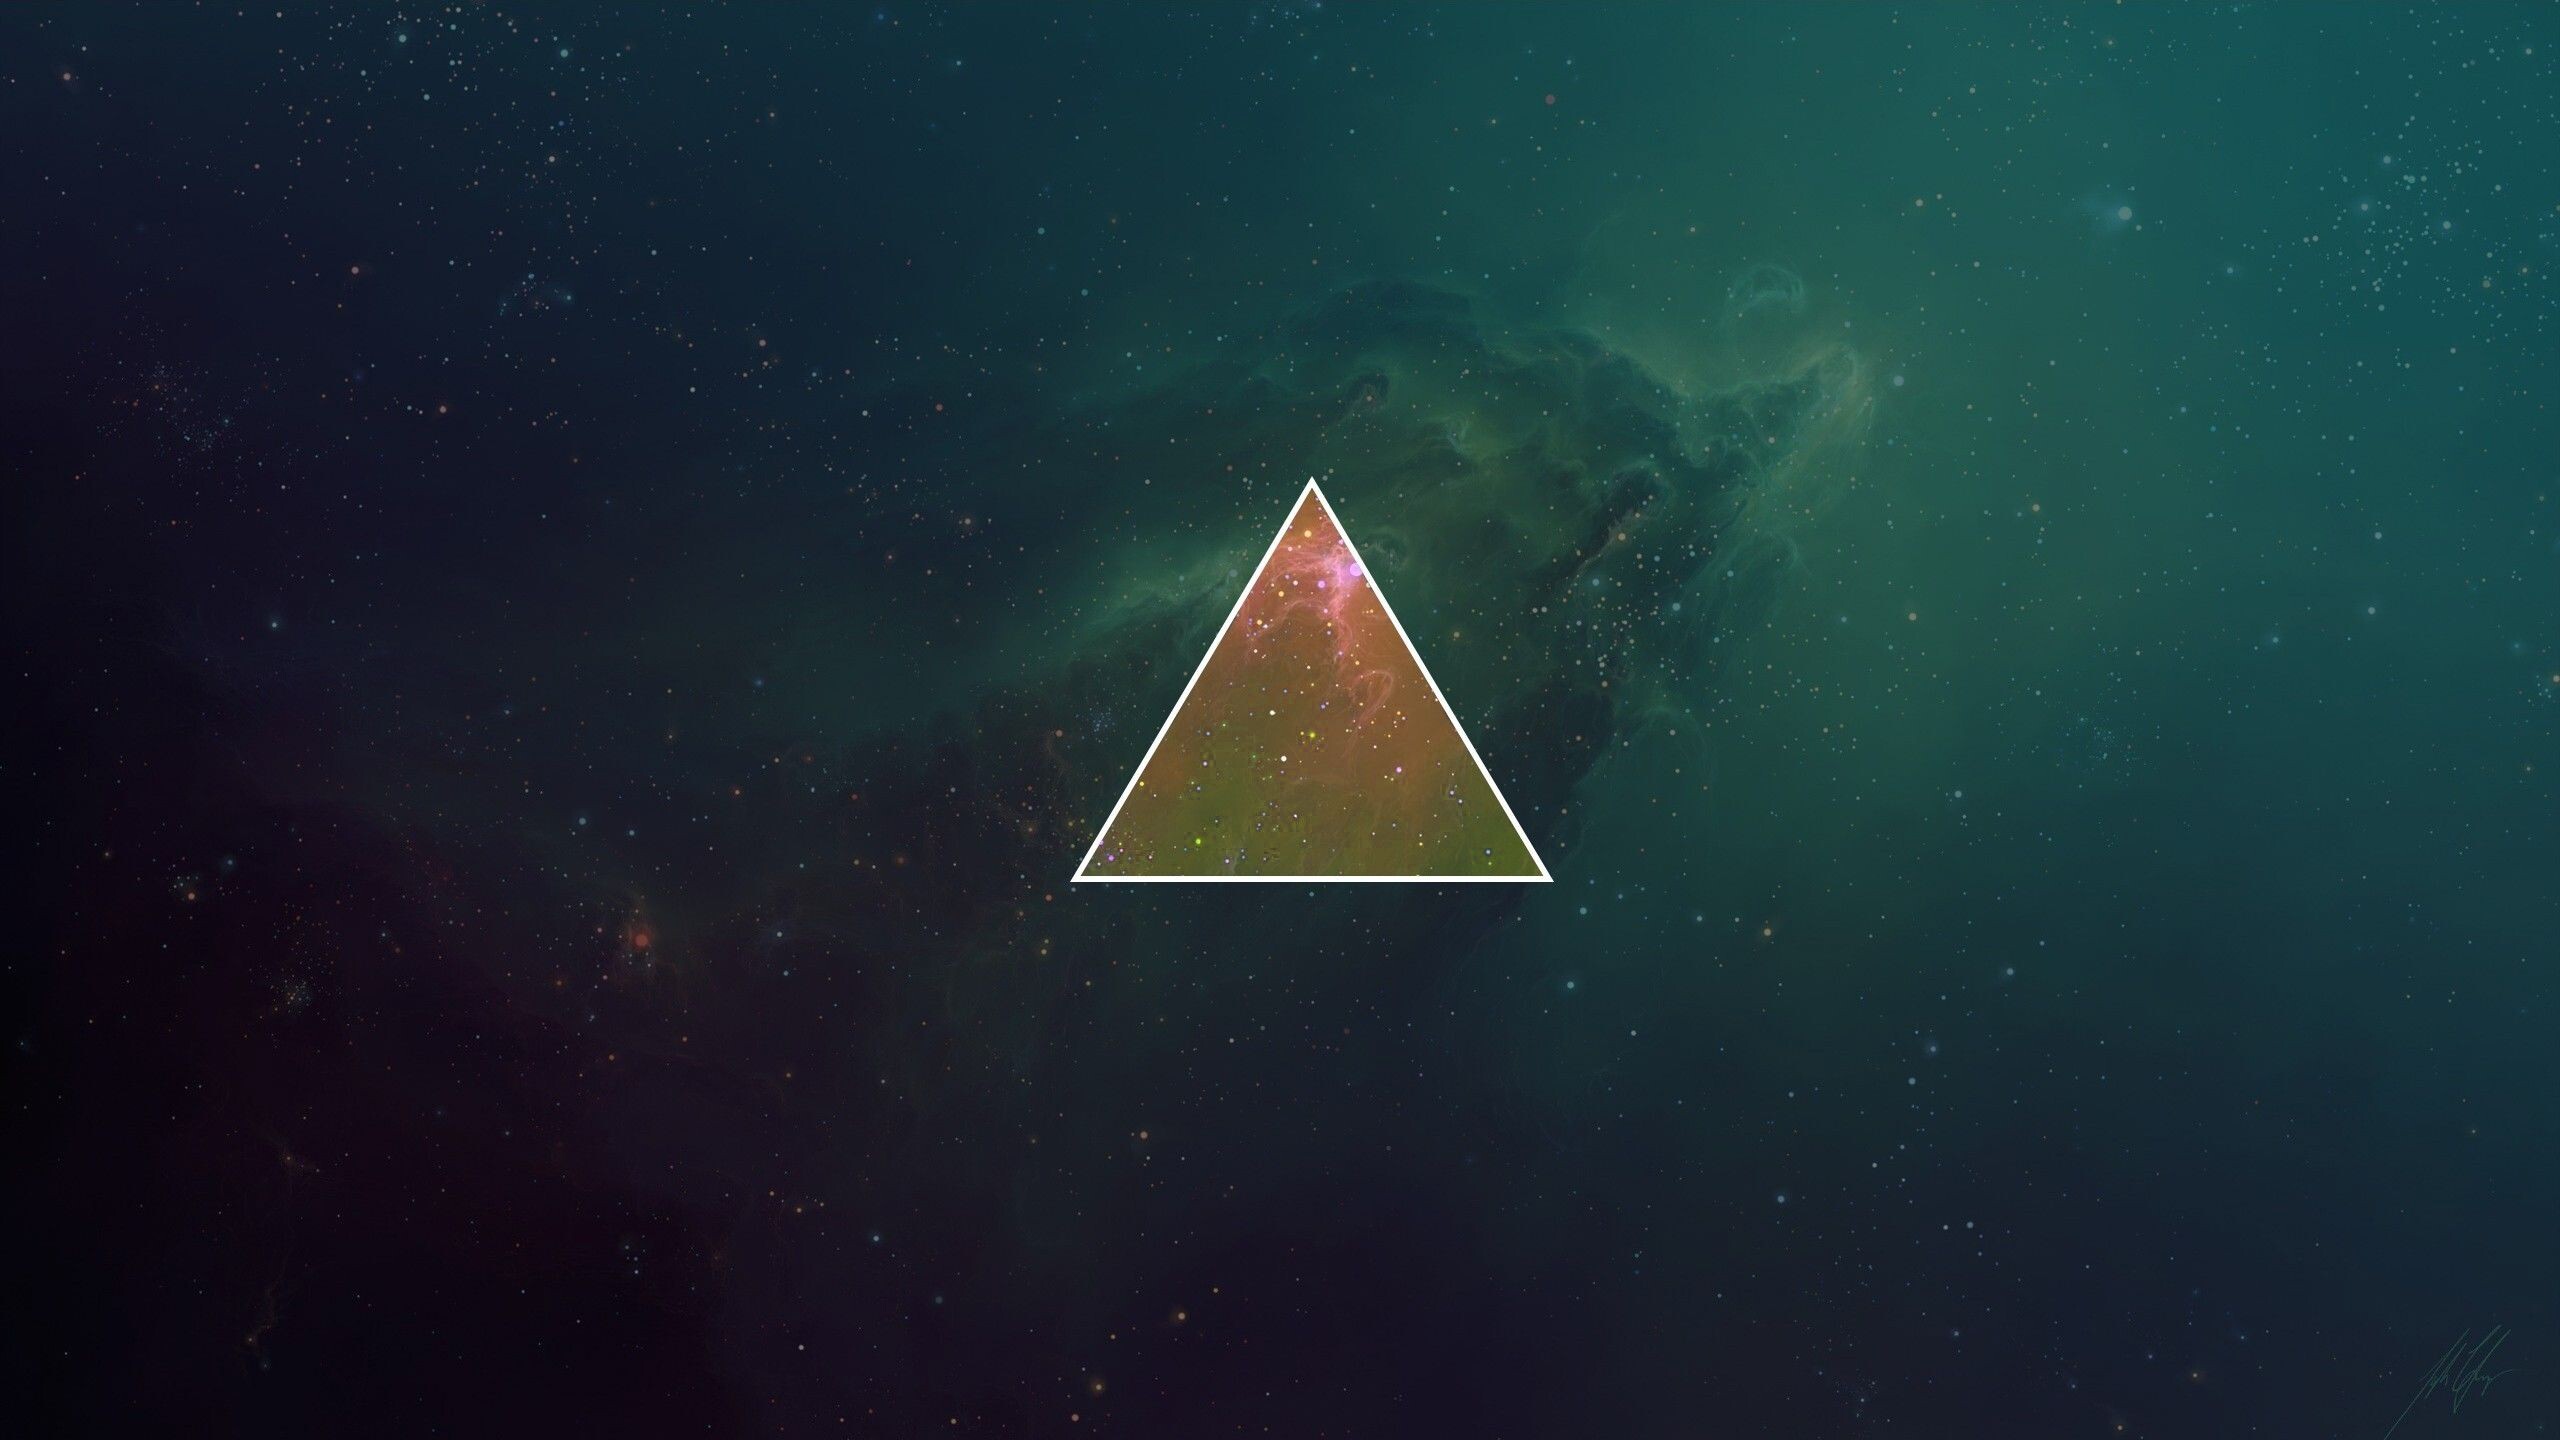 Triangle: Set of three lines, Universe, Equilateral figure. 2560x1440 HD Wallpaper.